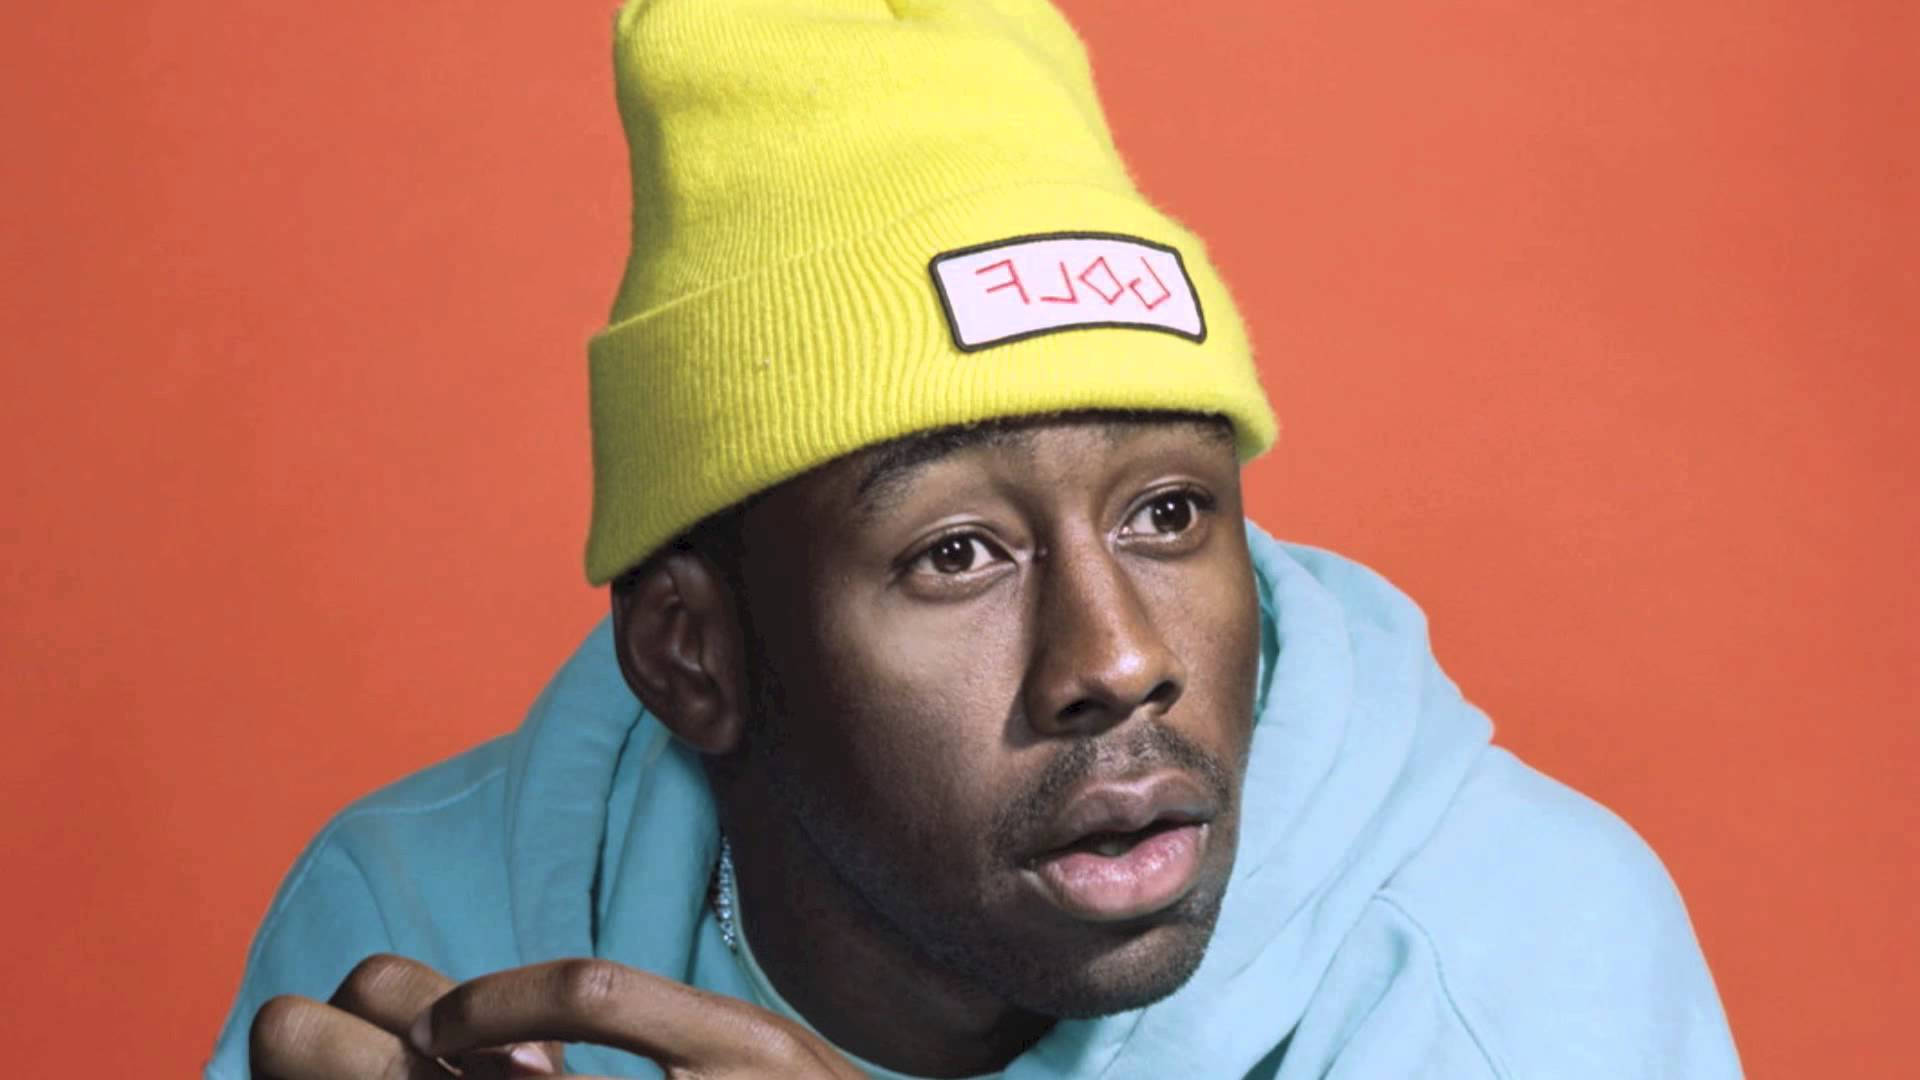 Tyler The Creator looking confident and relaxed in an orange background Wallpaper